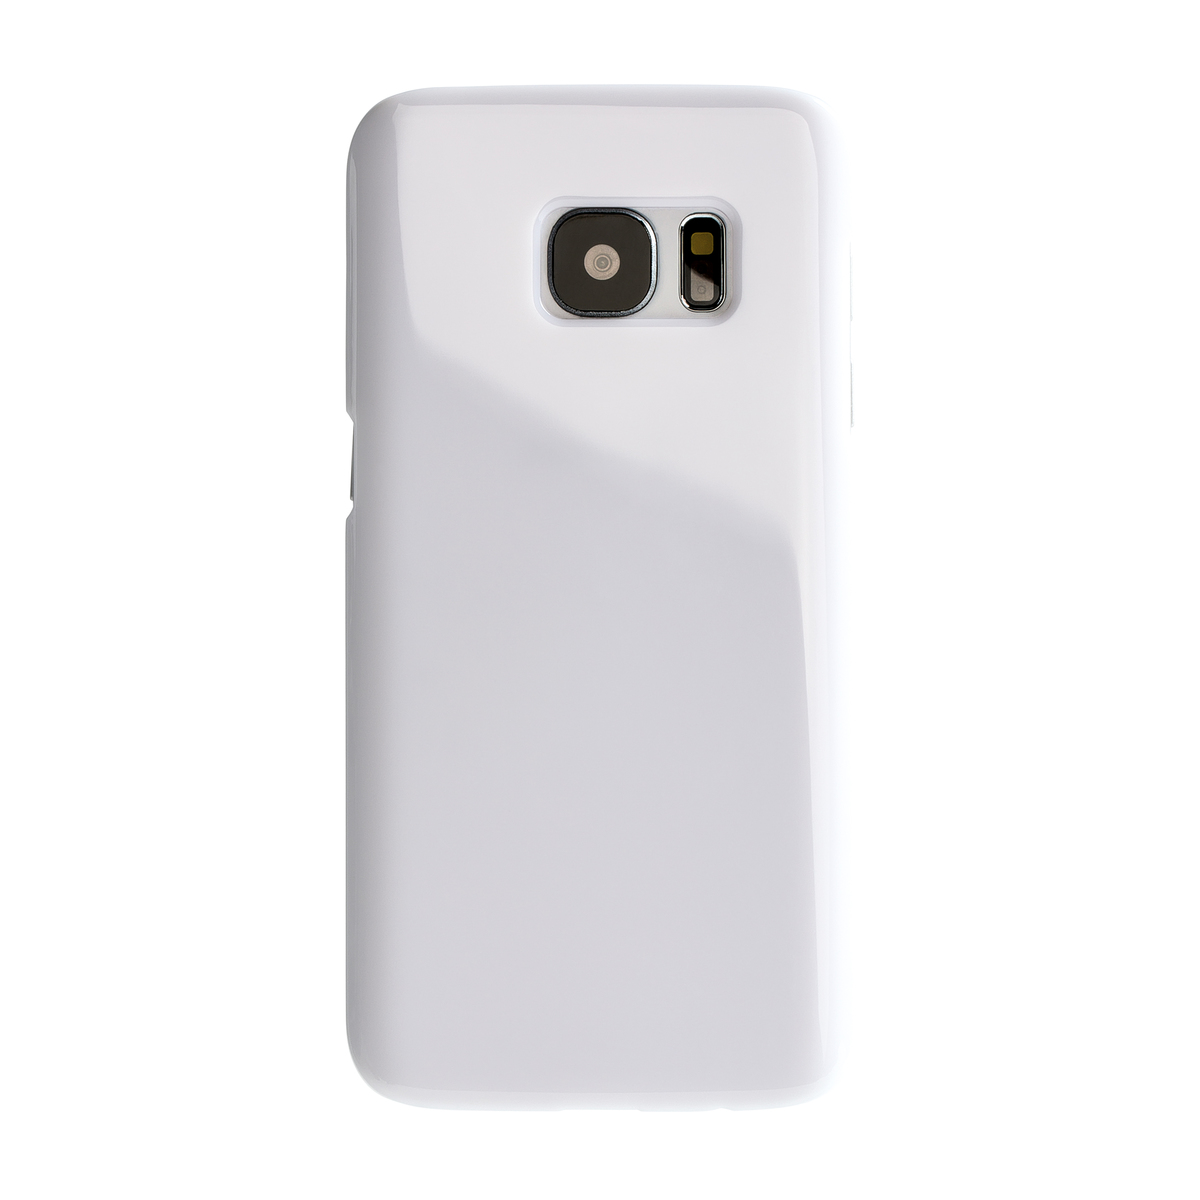 LM Smartphonecover REFLECTS-COVER XIII Samsung Galaxy S7 WHITE weiß